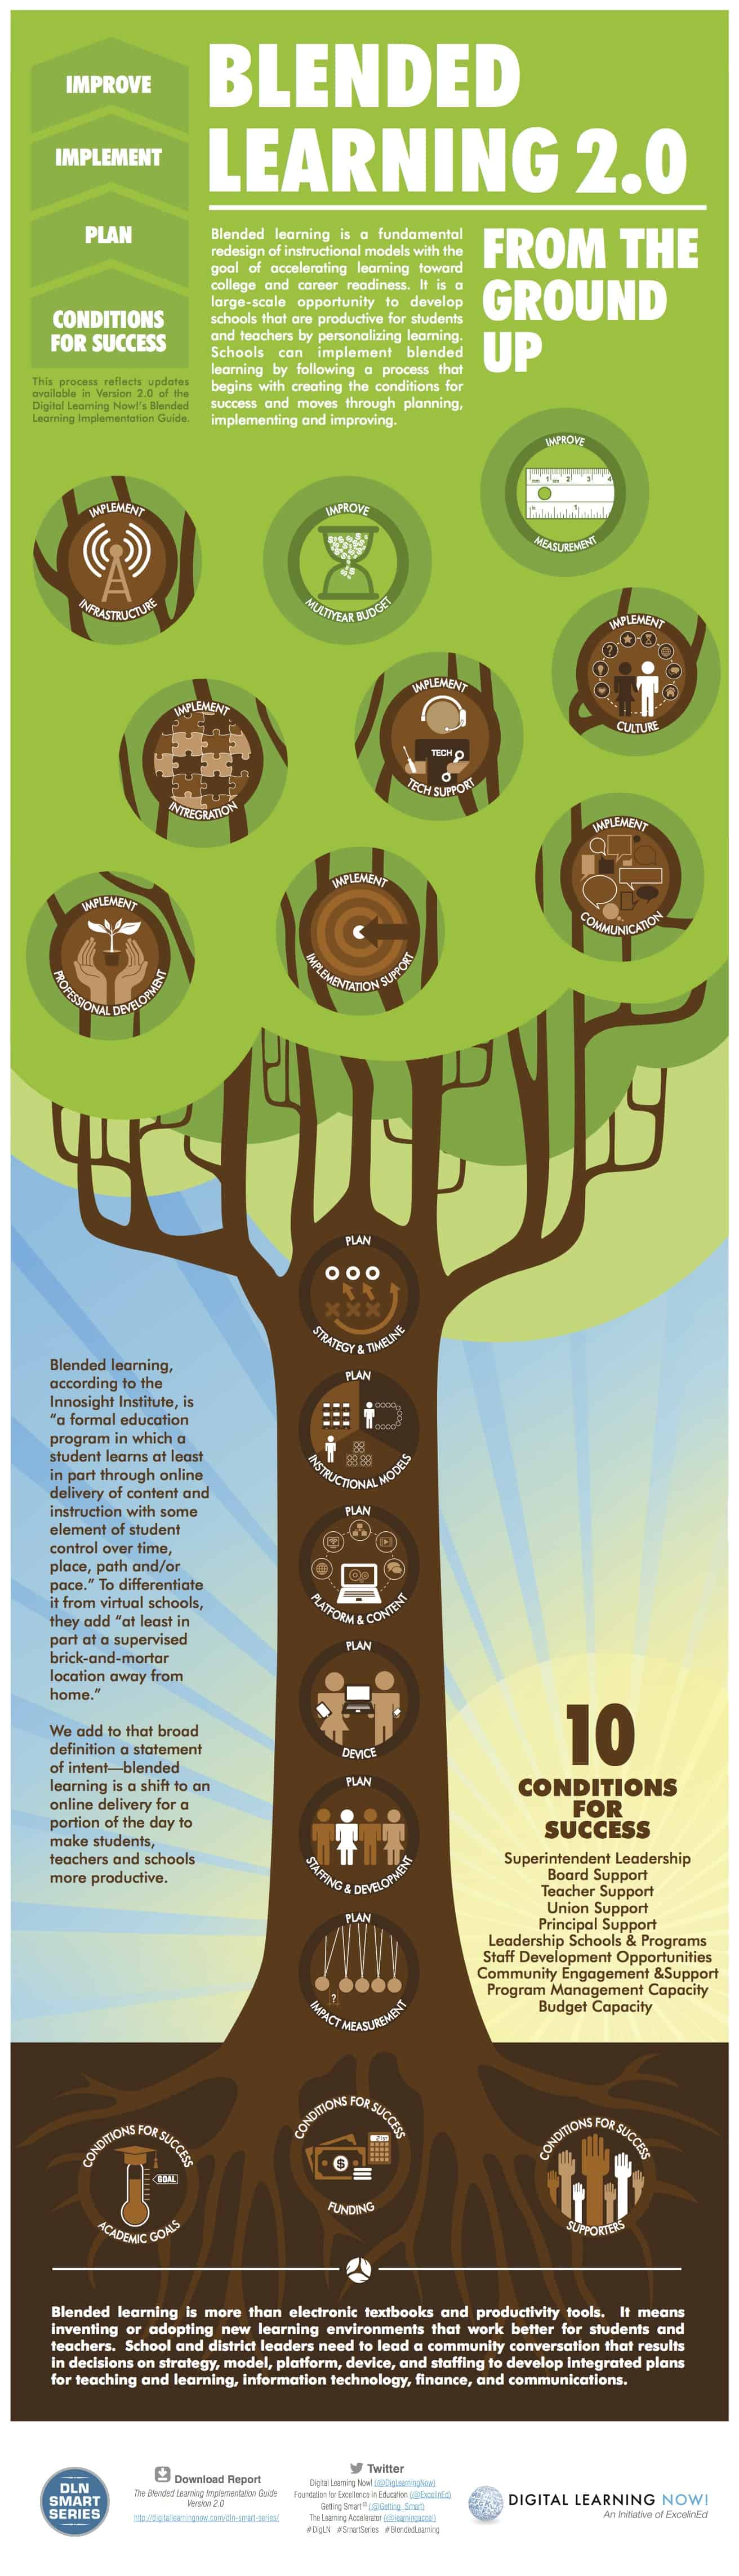 BL2-InfographicTree-24Oct2013